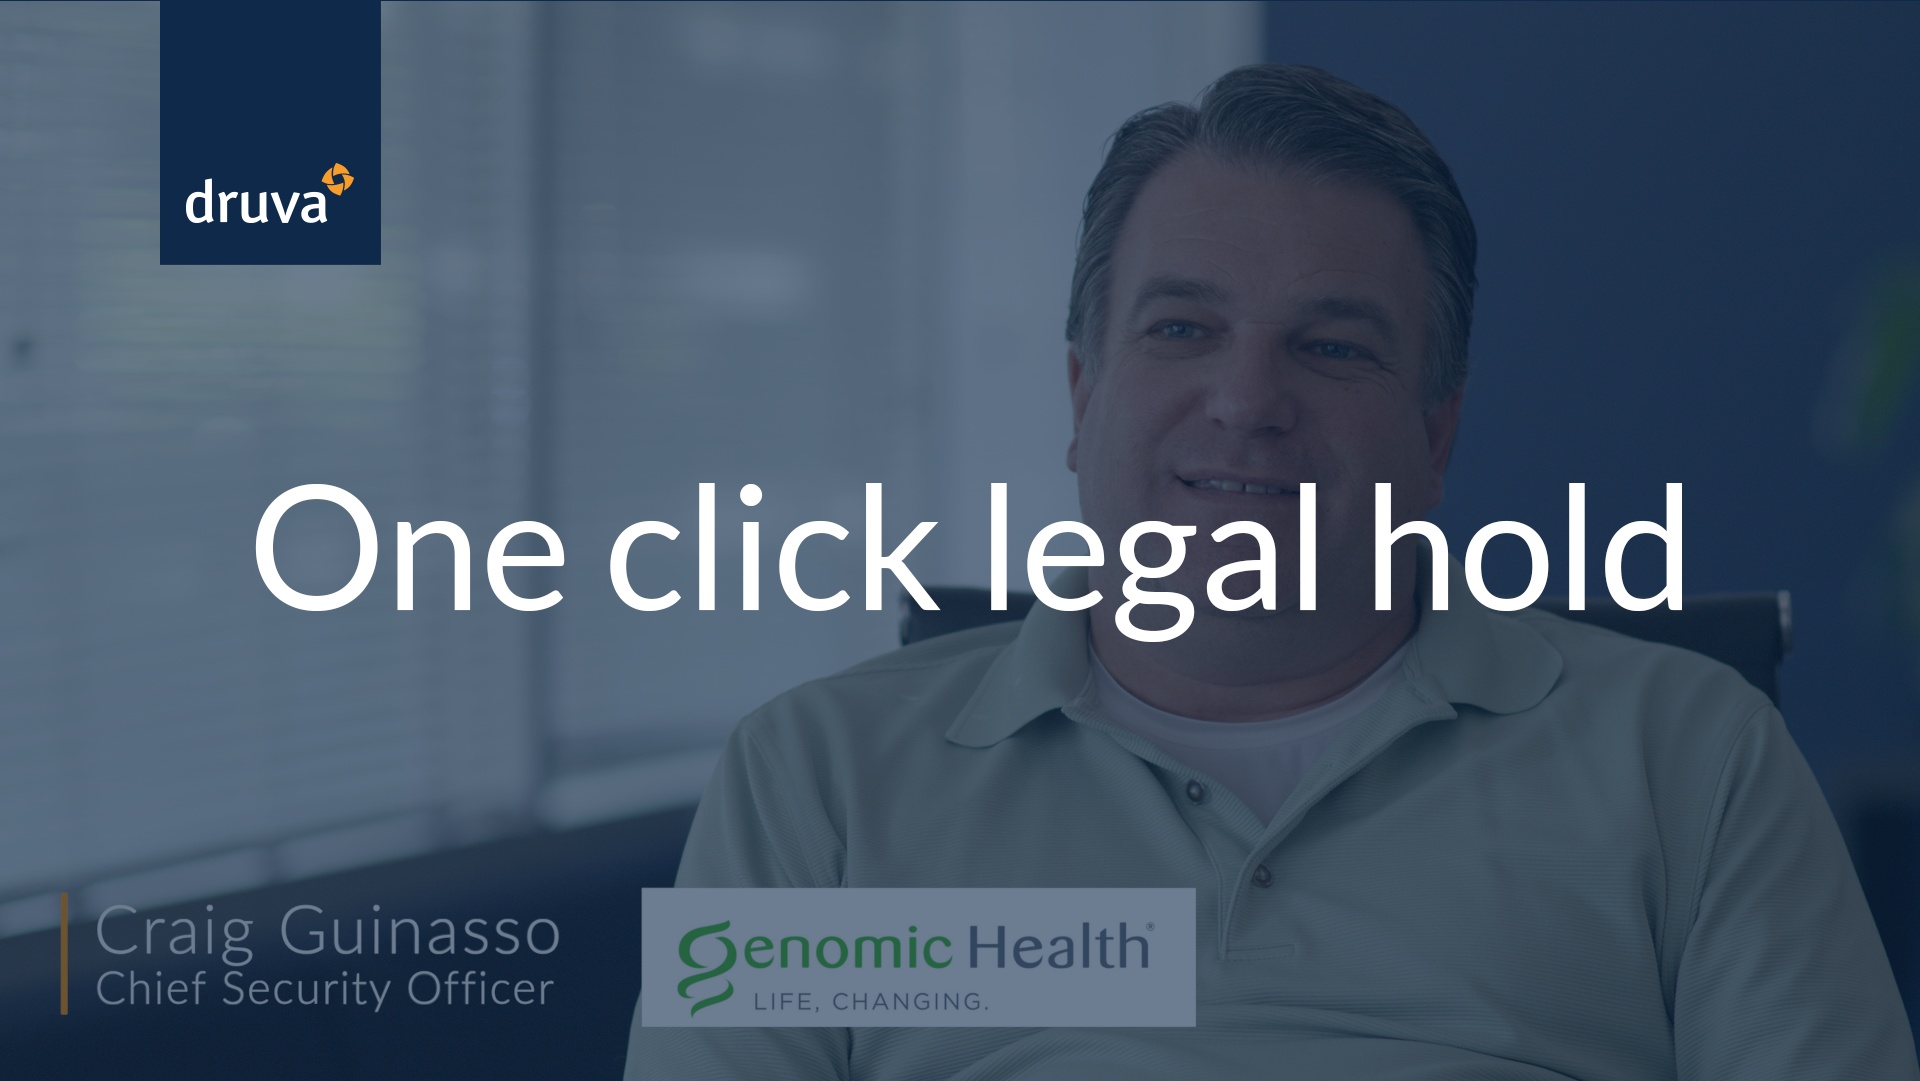 One click legal hold for Genomic Health